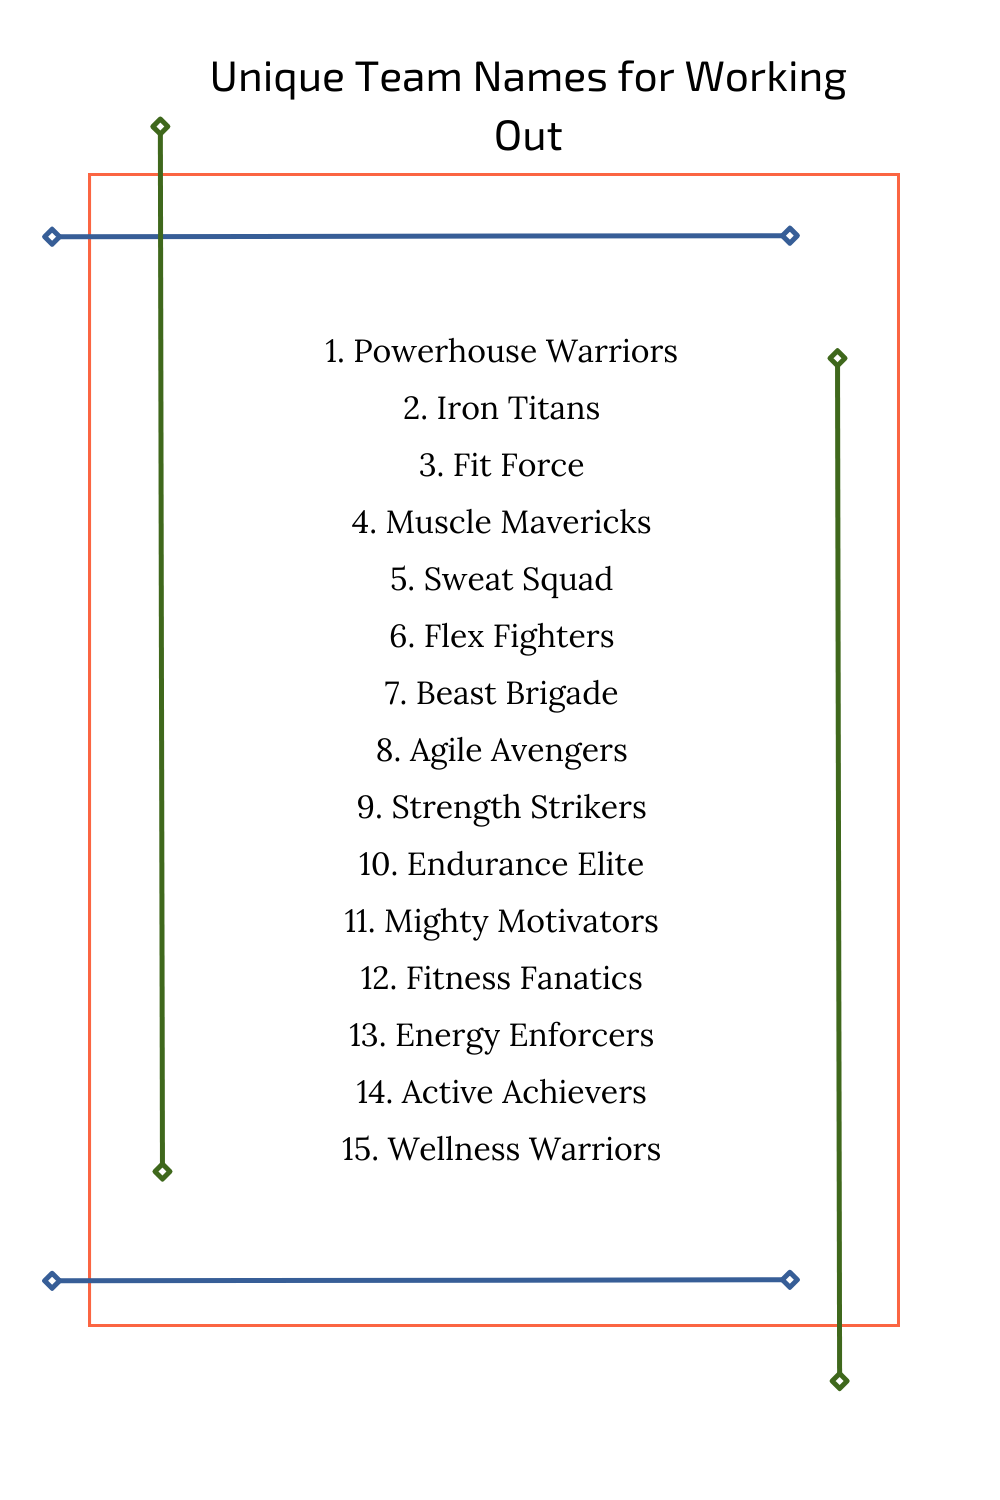 Unique Team Names for Working Out